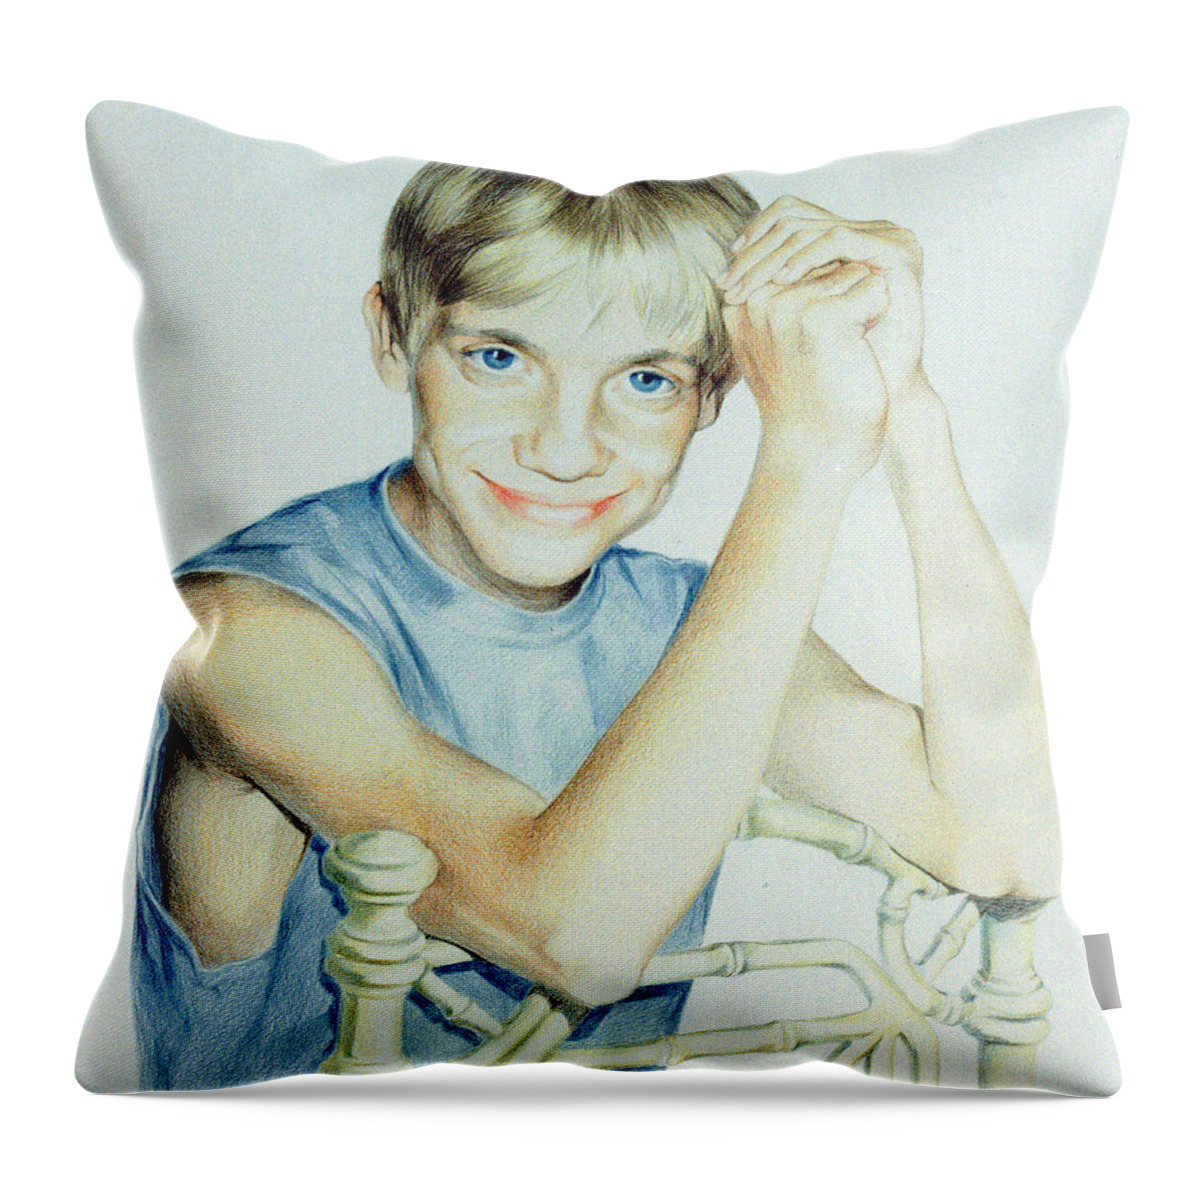  Throw Pillow featuring the drawing Portrait of Yury by Alena Nikifarava